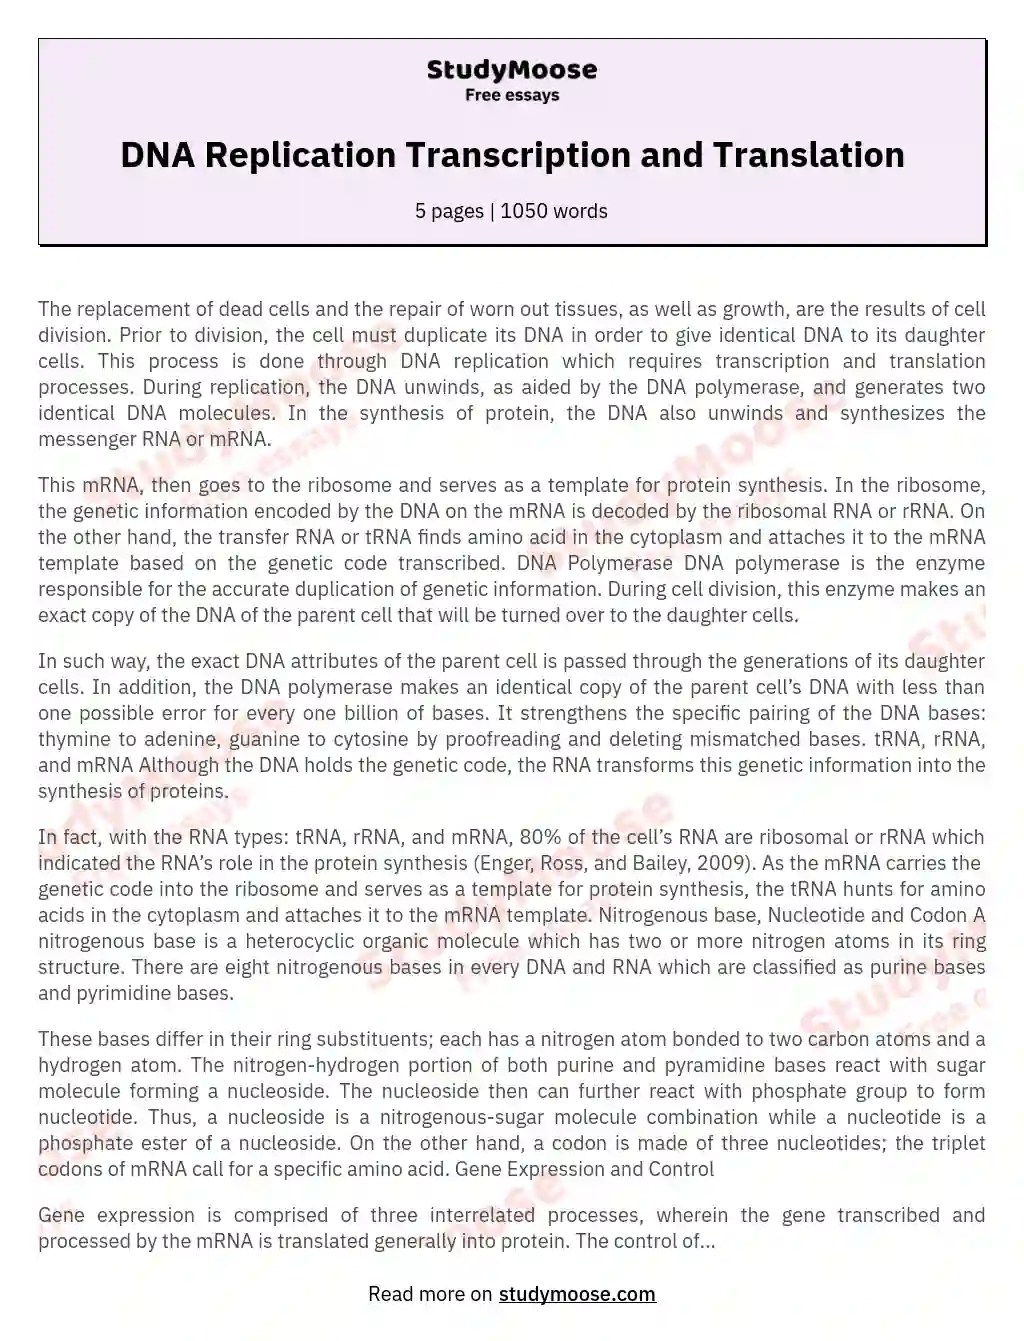 an essay about dna replication